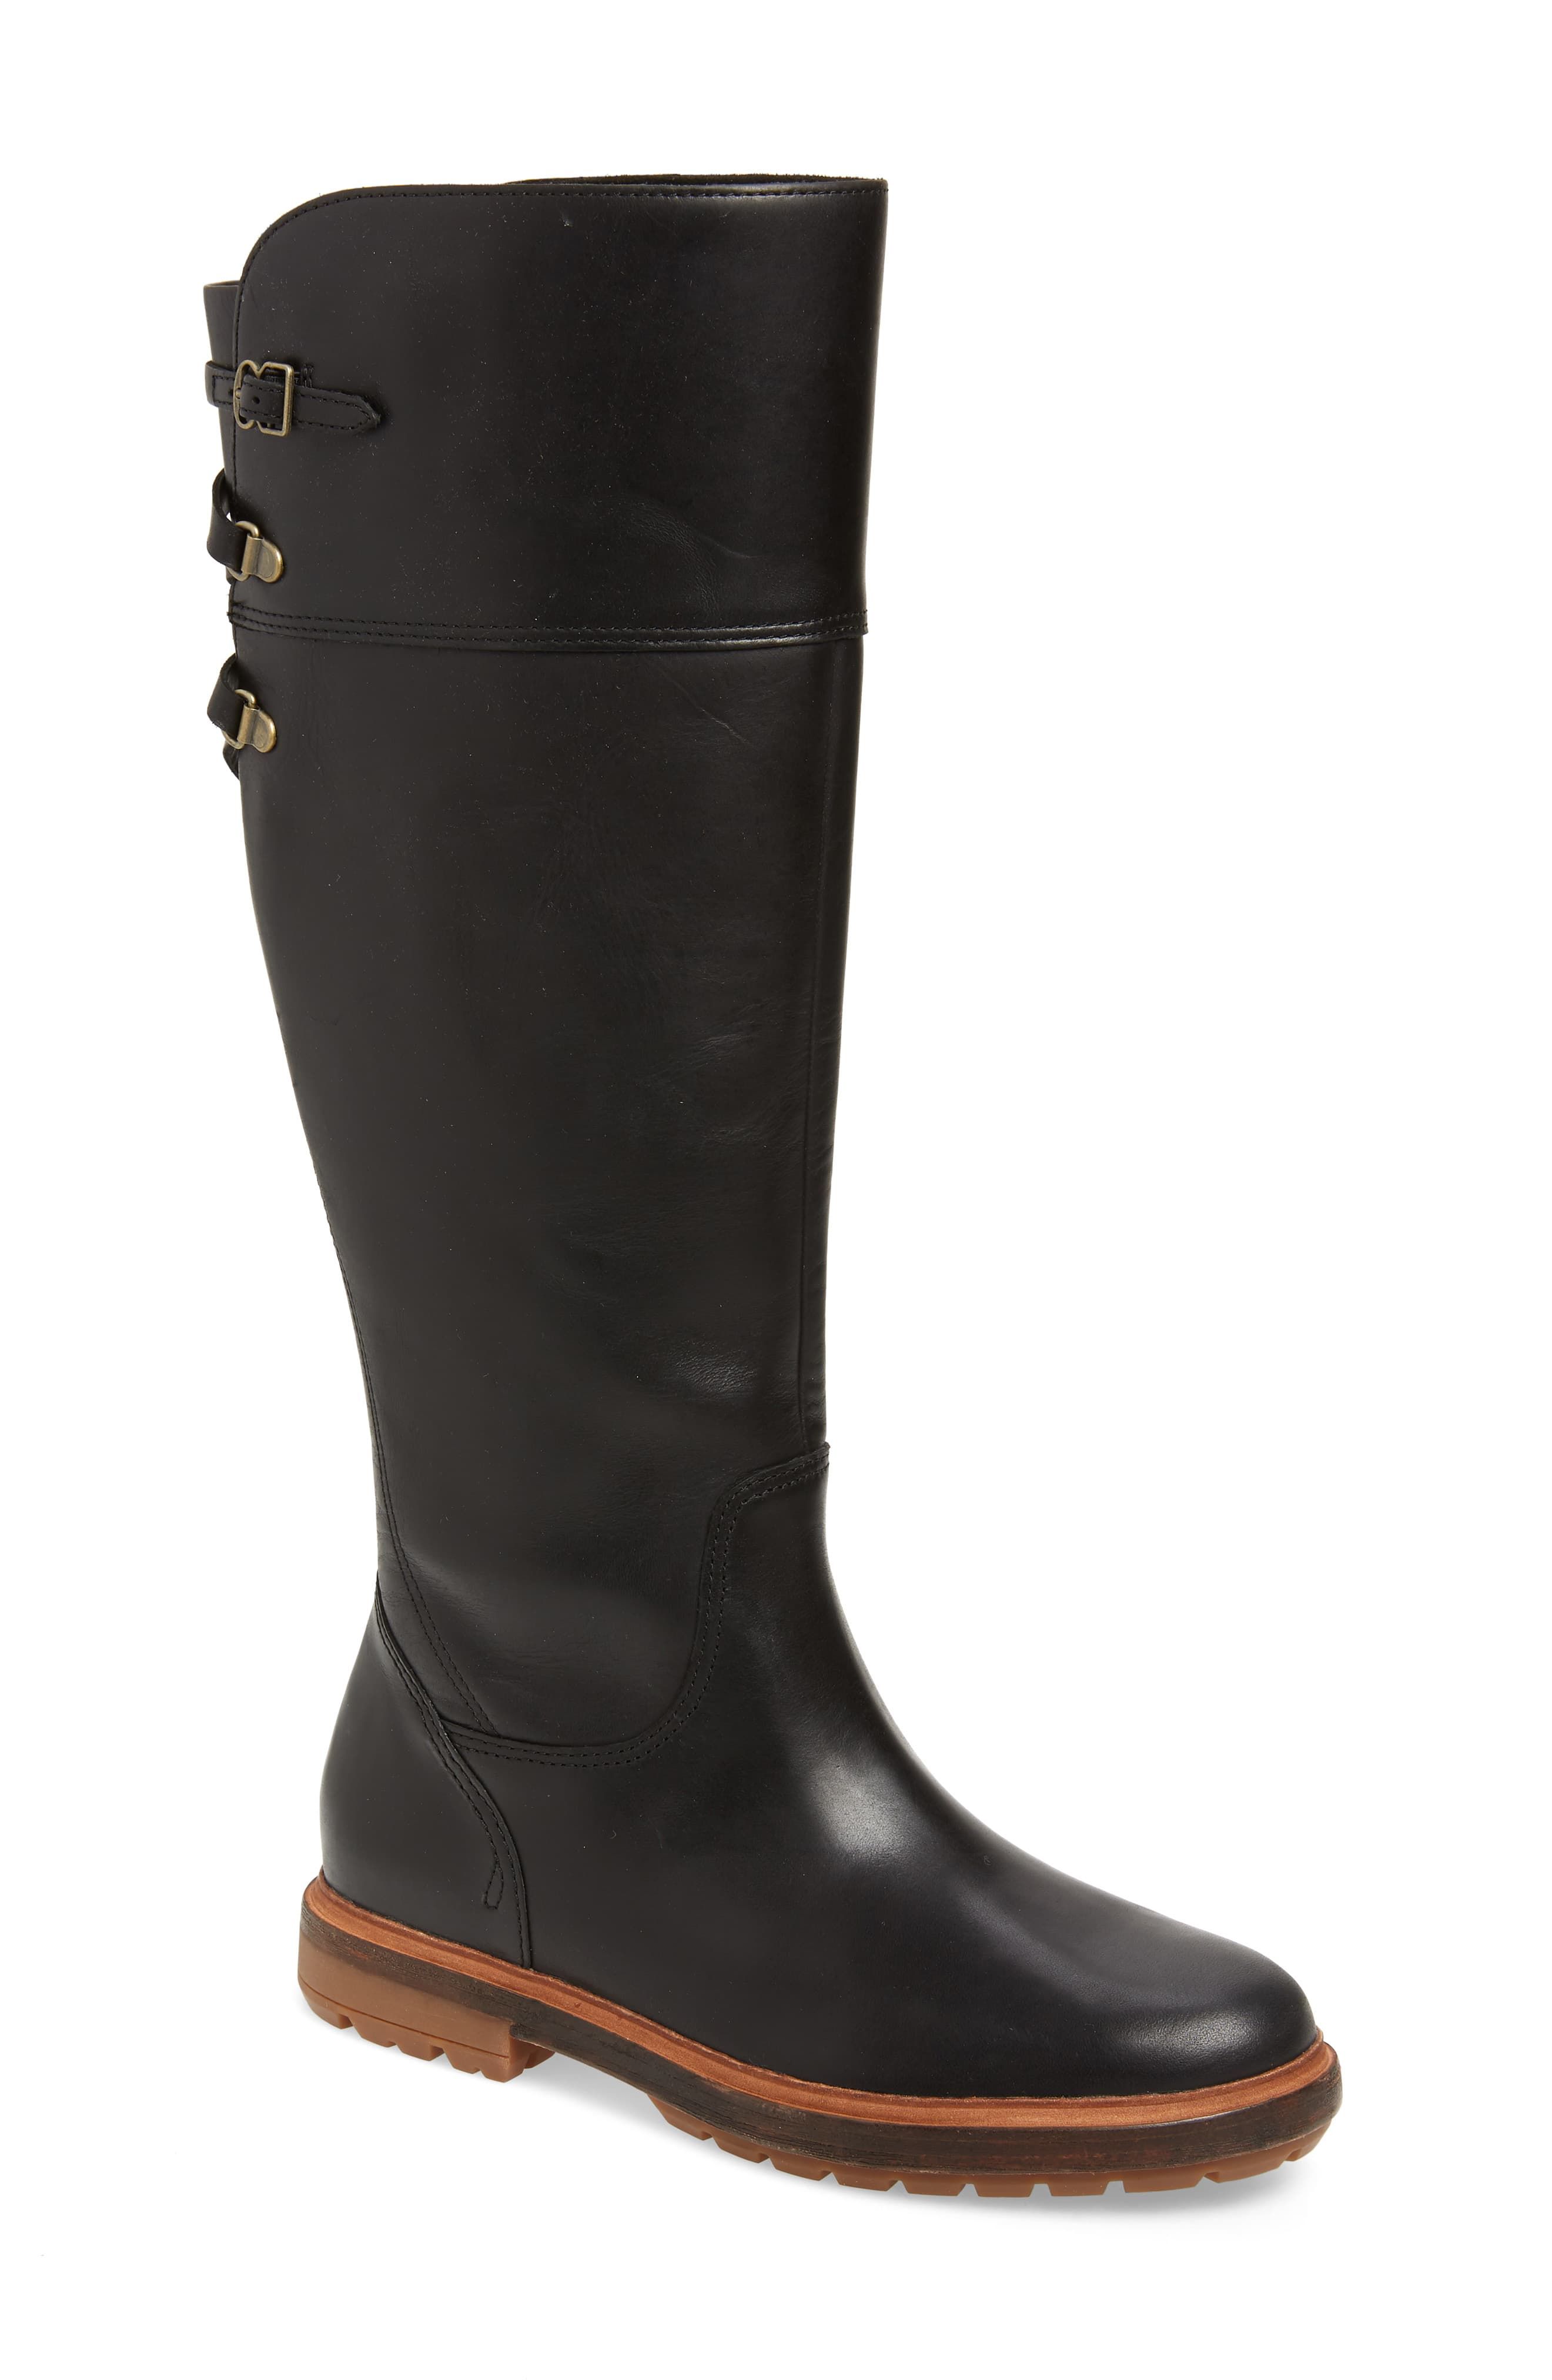 Perfect Pairs Riley Flair Knee High Boot